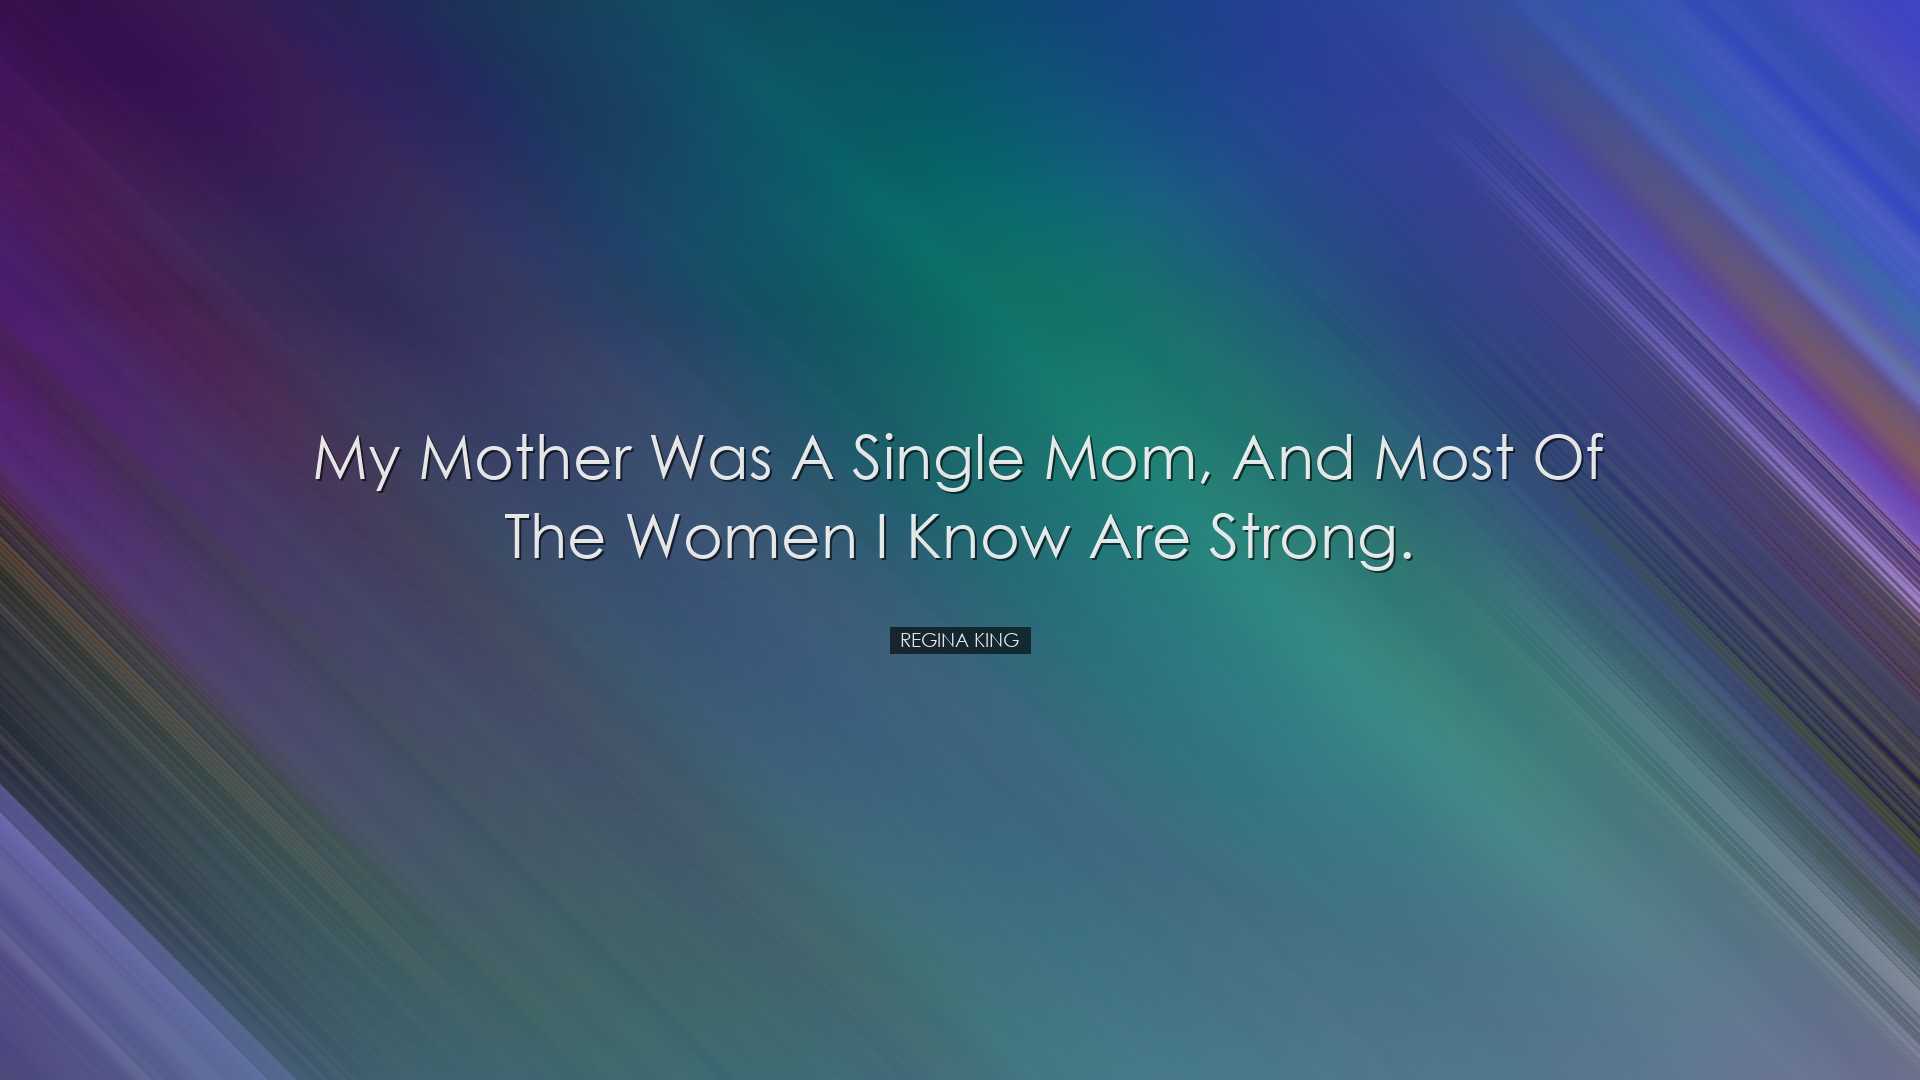 My mother was a single mom, and most of the women I know are stron